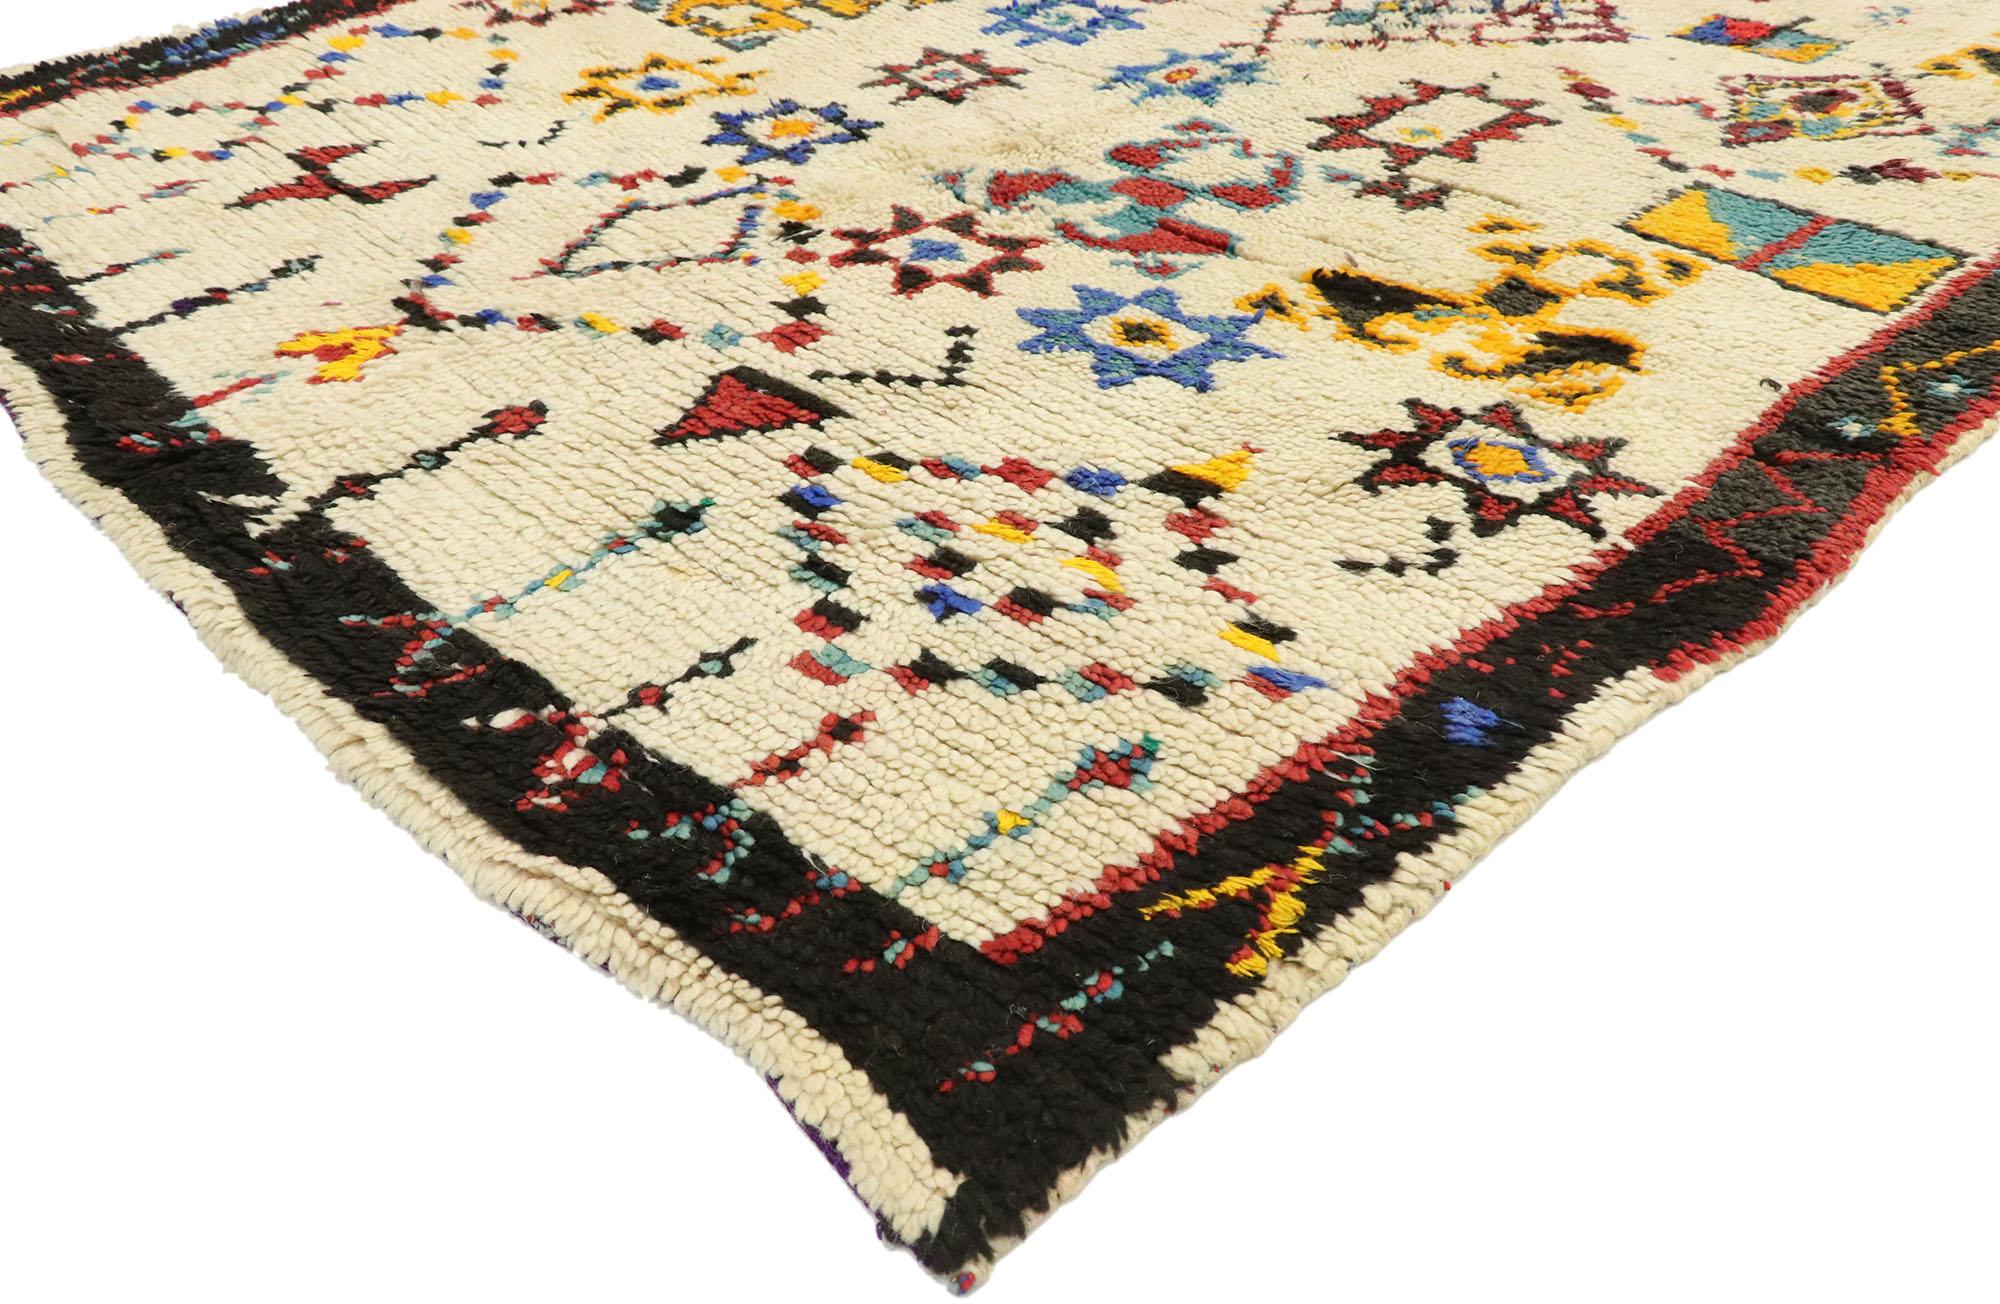 20697, vintage Berber Moroccan Azilal rug with boho chic tribal style and Hygge Vibes. Softer yet no less striking, this hand knotted wool contemporary Moroccan rug embodies boho chic tribal style with hygge vibes. The abrashed beige field features